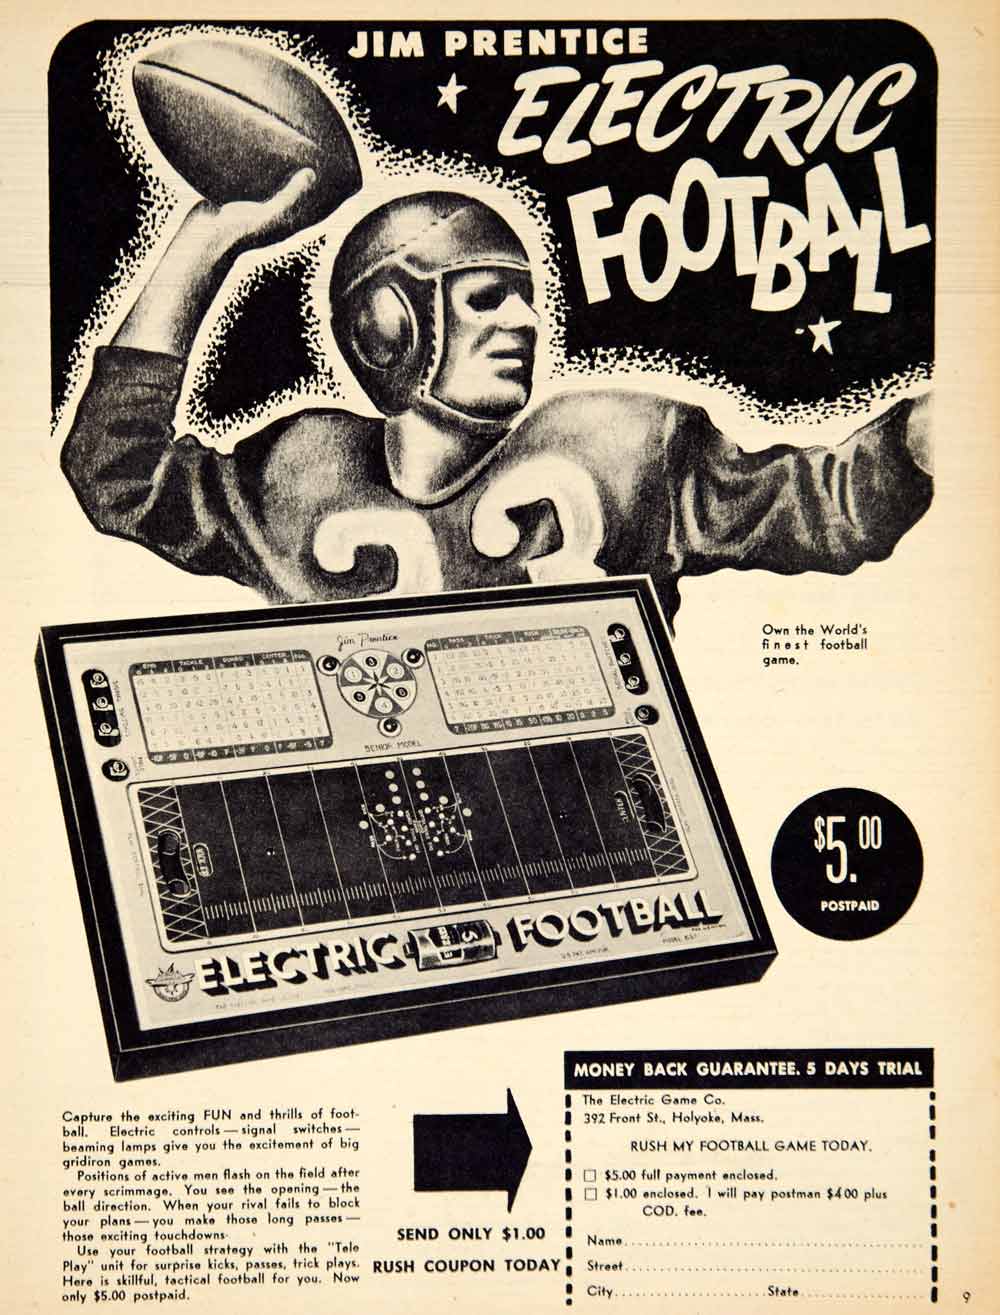 1953 Ad Jim Prentice Electric Football Board Game Toy 392 Front St Holyoke YSS3